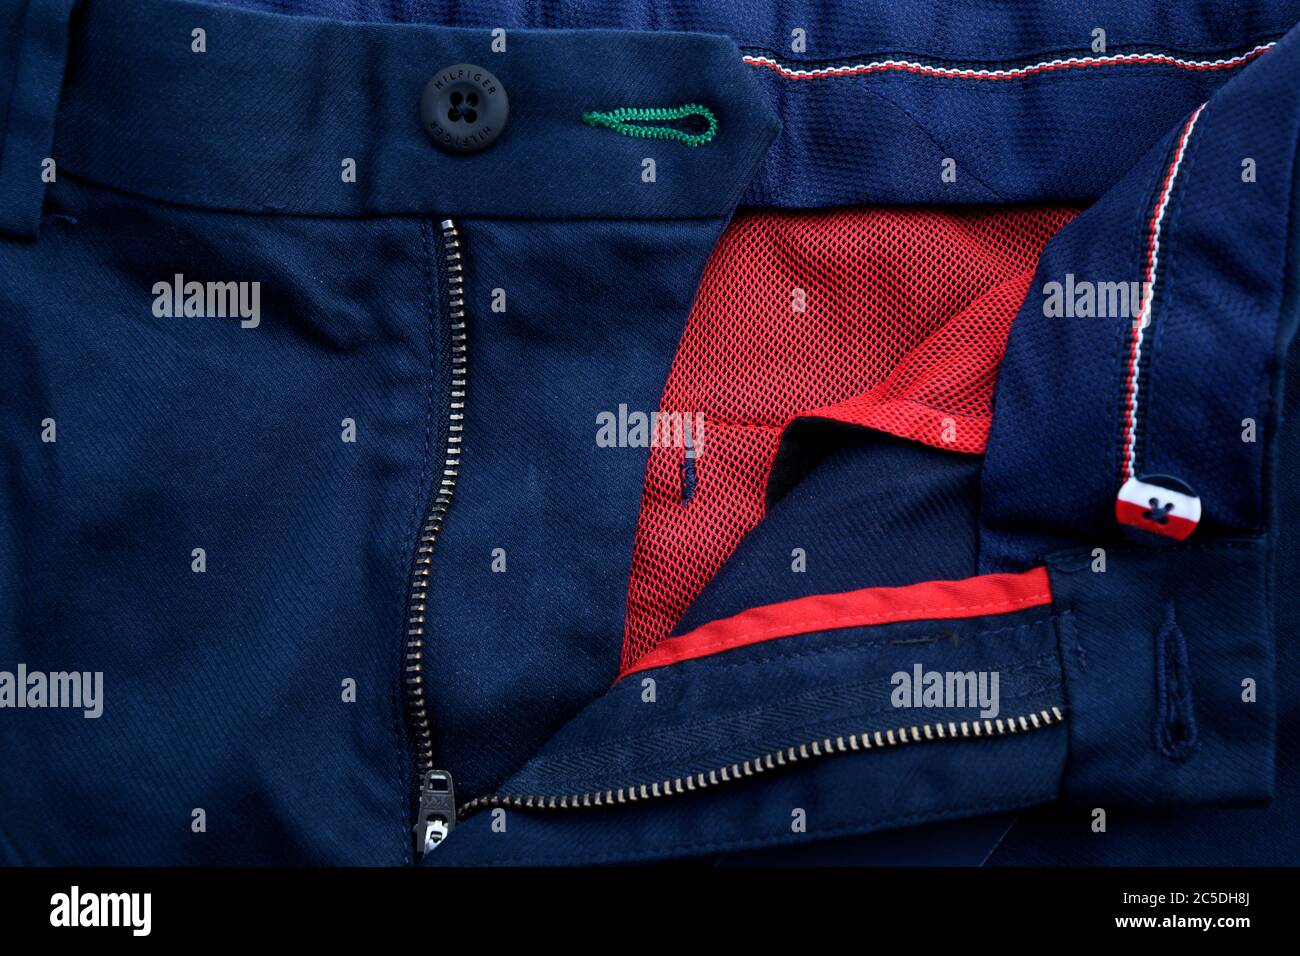 Tommy Hilfiger mens trousers Stock Photo - Alamy